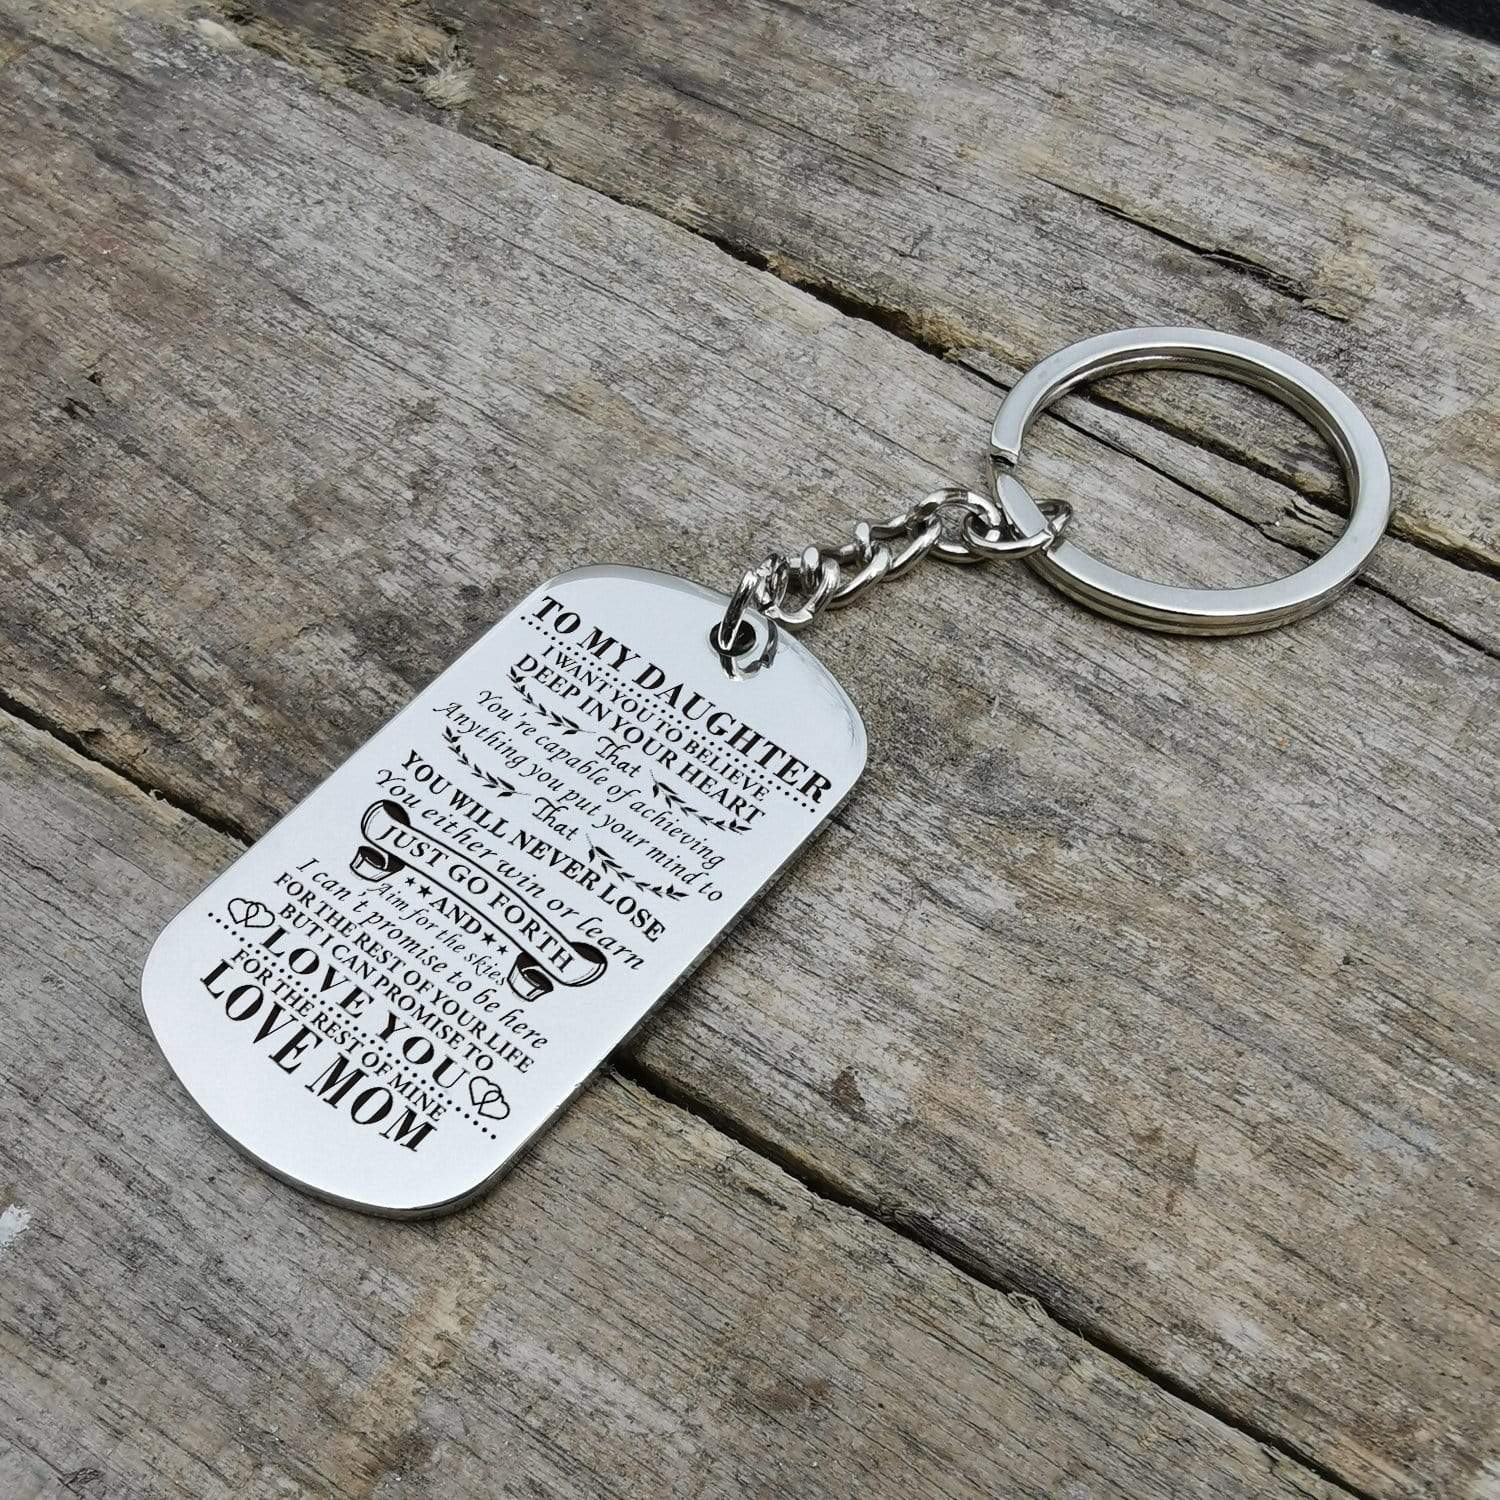 Keychains Mom To Daughter - You Will Never Lose Personalized Keychain GiveMe-Gifts